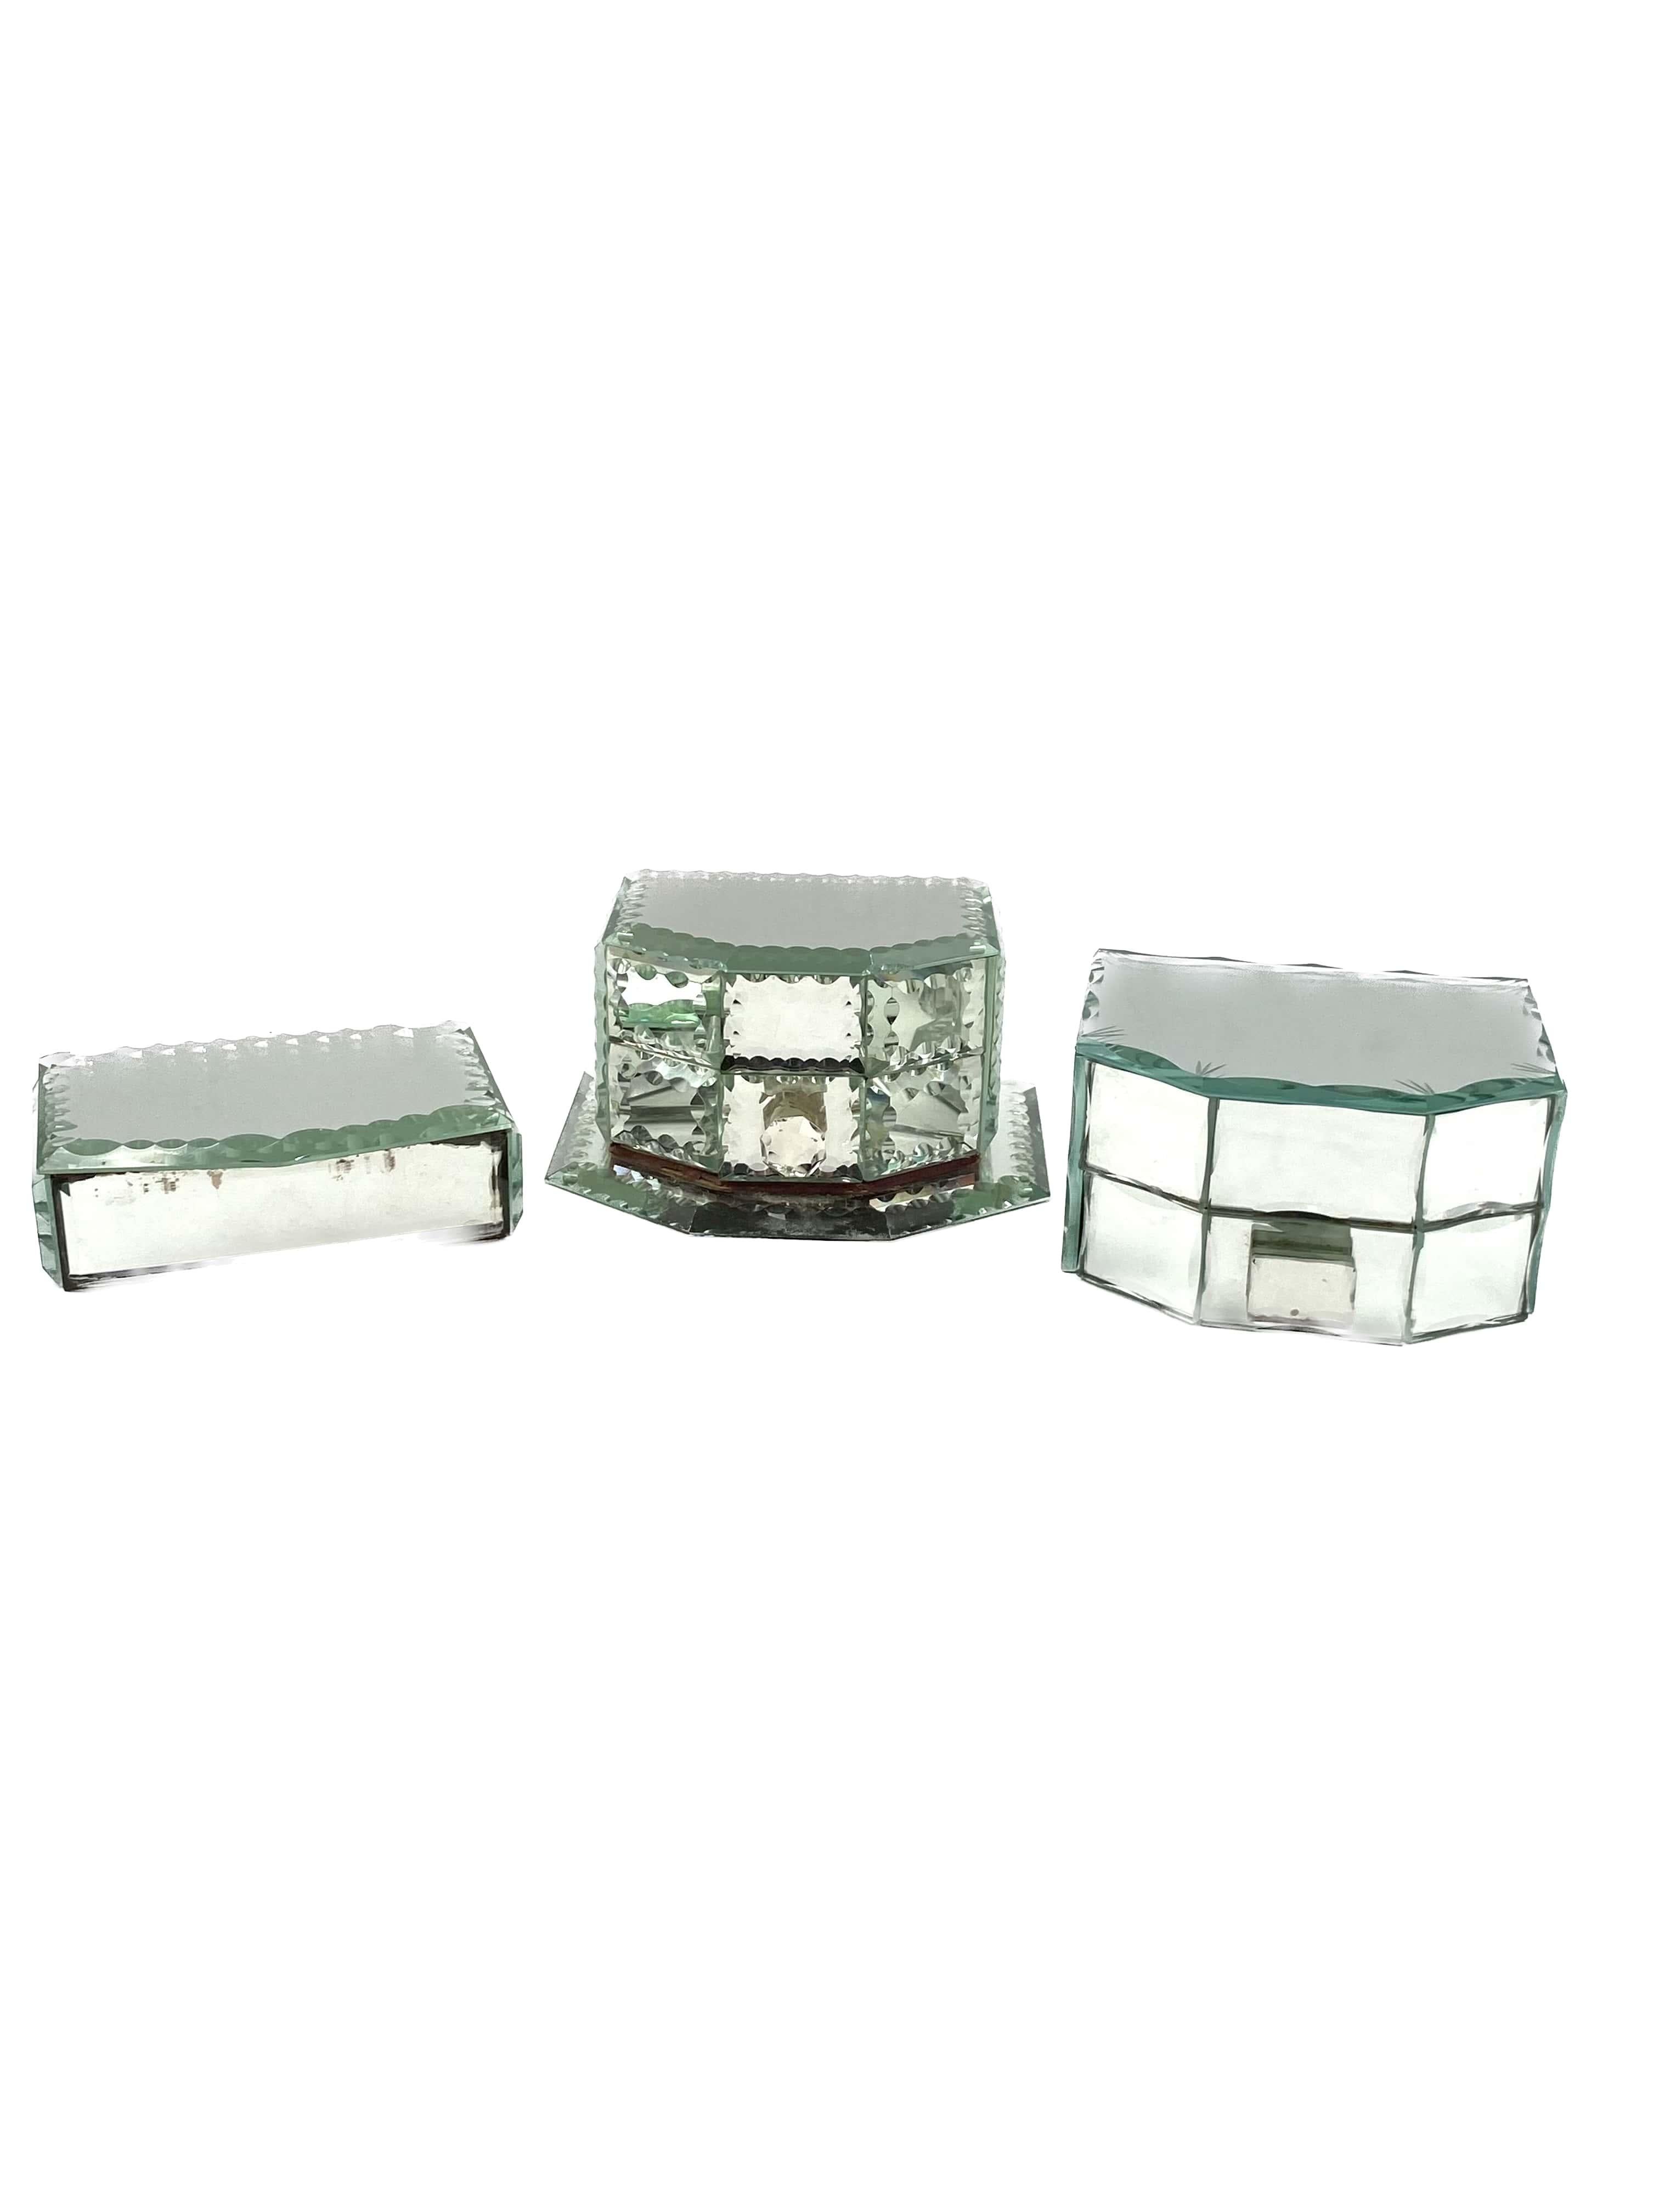 Mid-20th Century Midcentury Set of 3 Mirrored Jewelry Boxes, France, 1940s For Sale